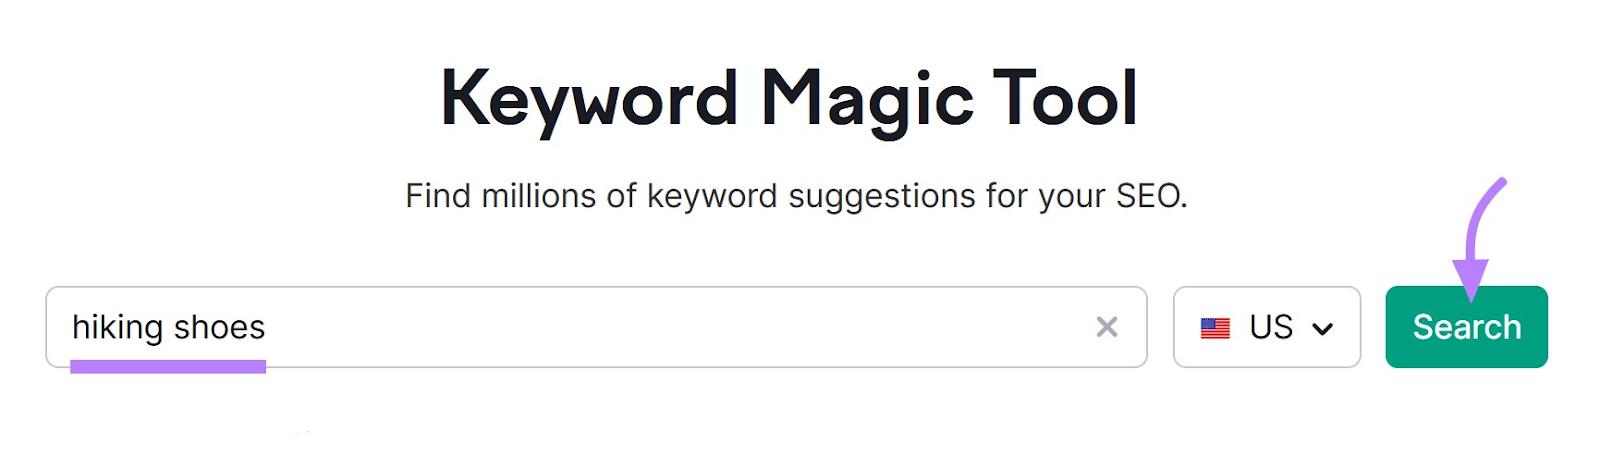 search for "hiking shoes" in Keyword Magic Tool